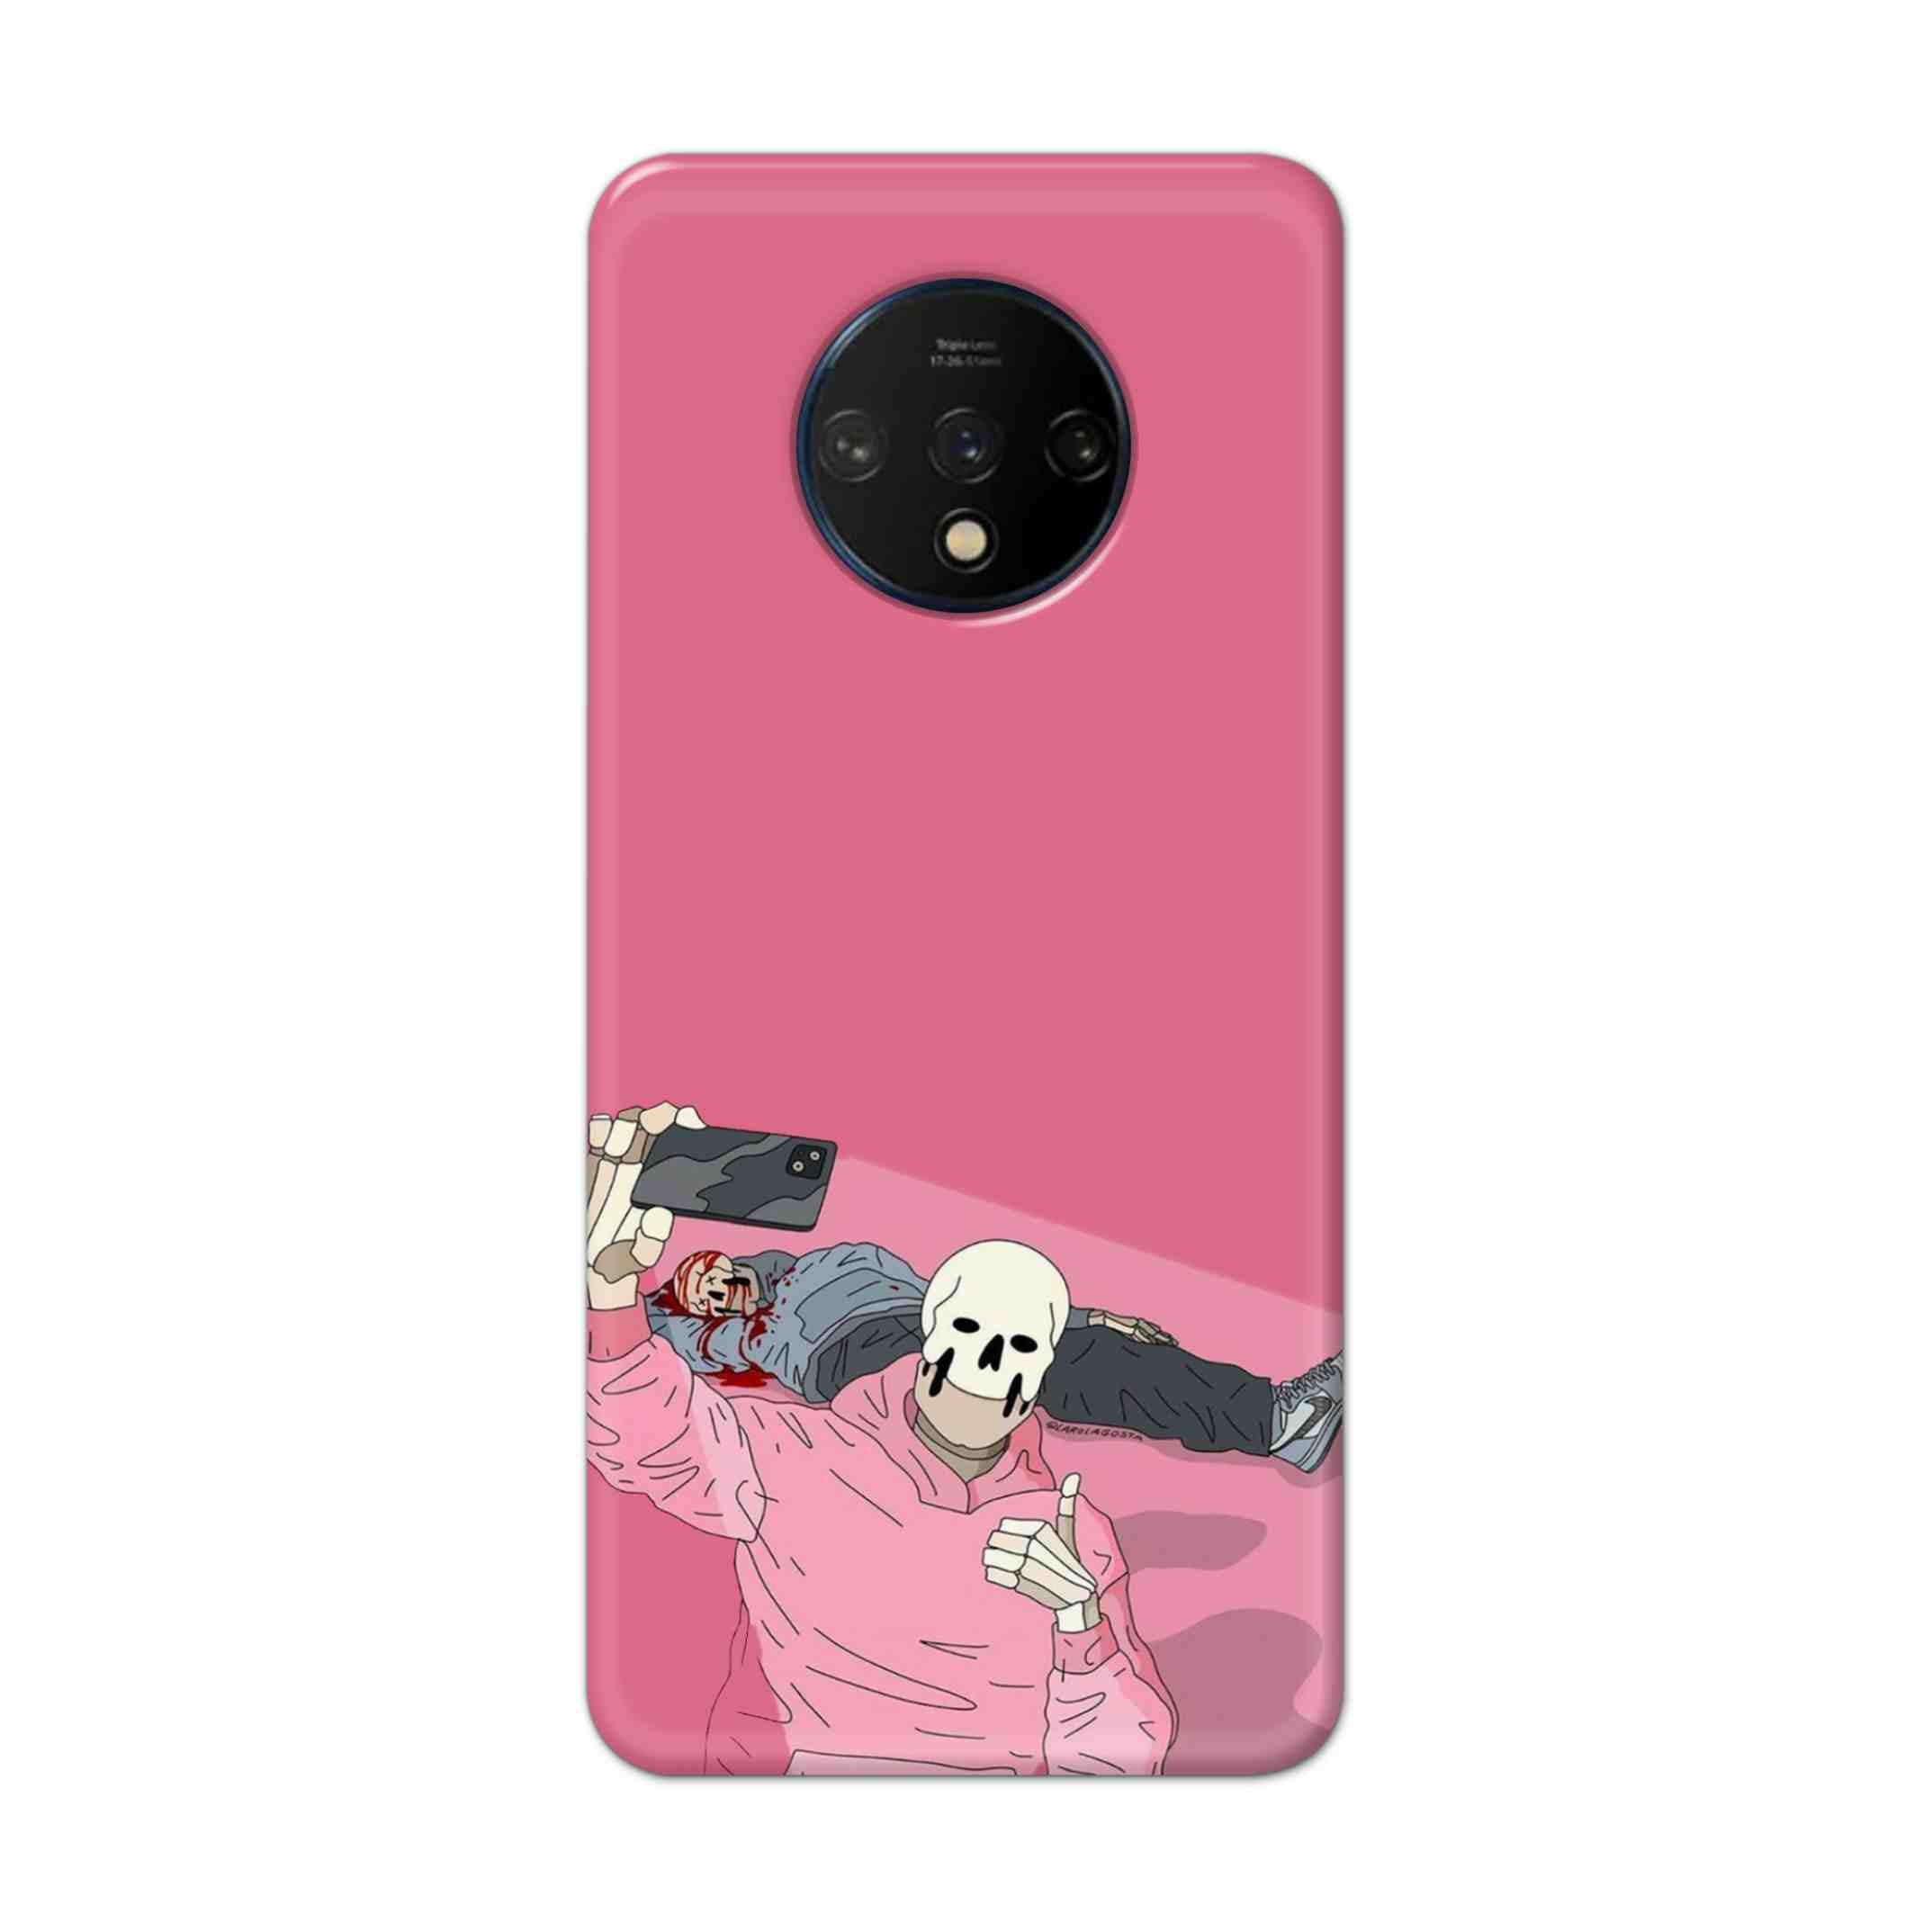 Buy Selfie Hard Back Mobile Phone Case Cover For OnePlus 7T Online